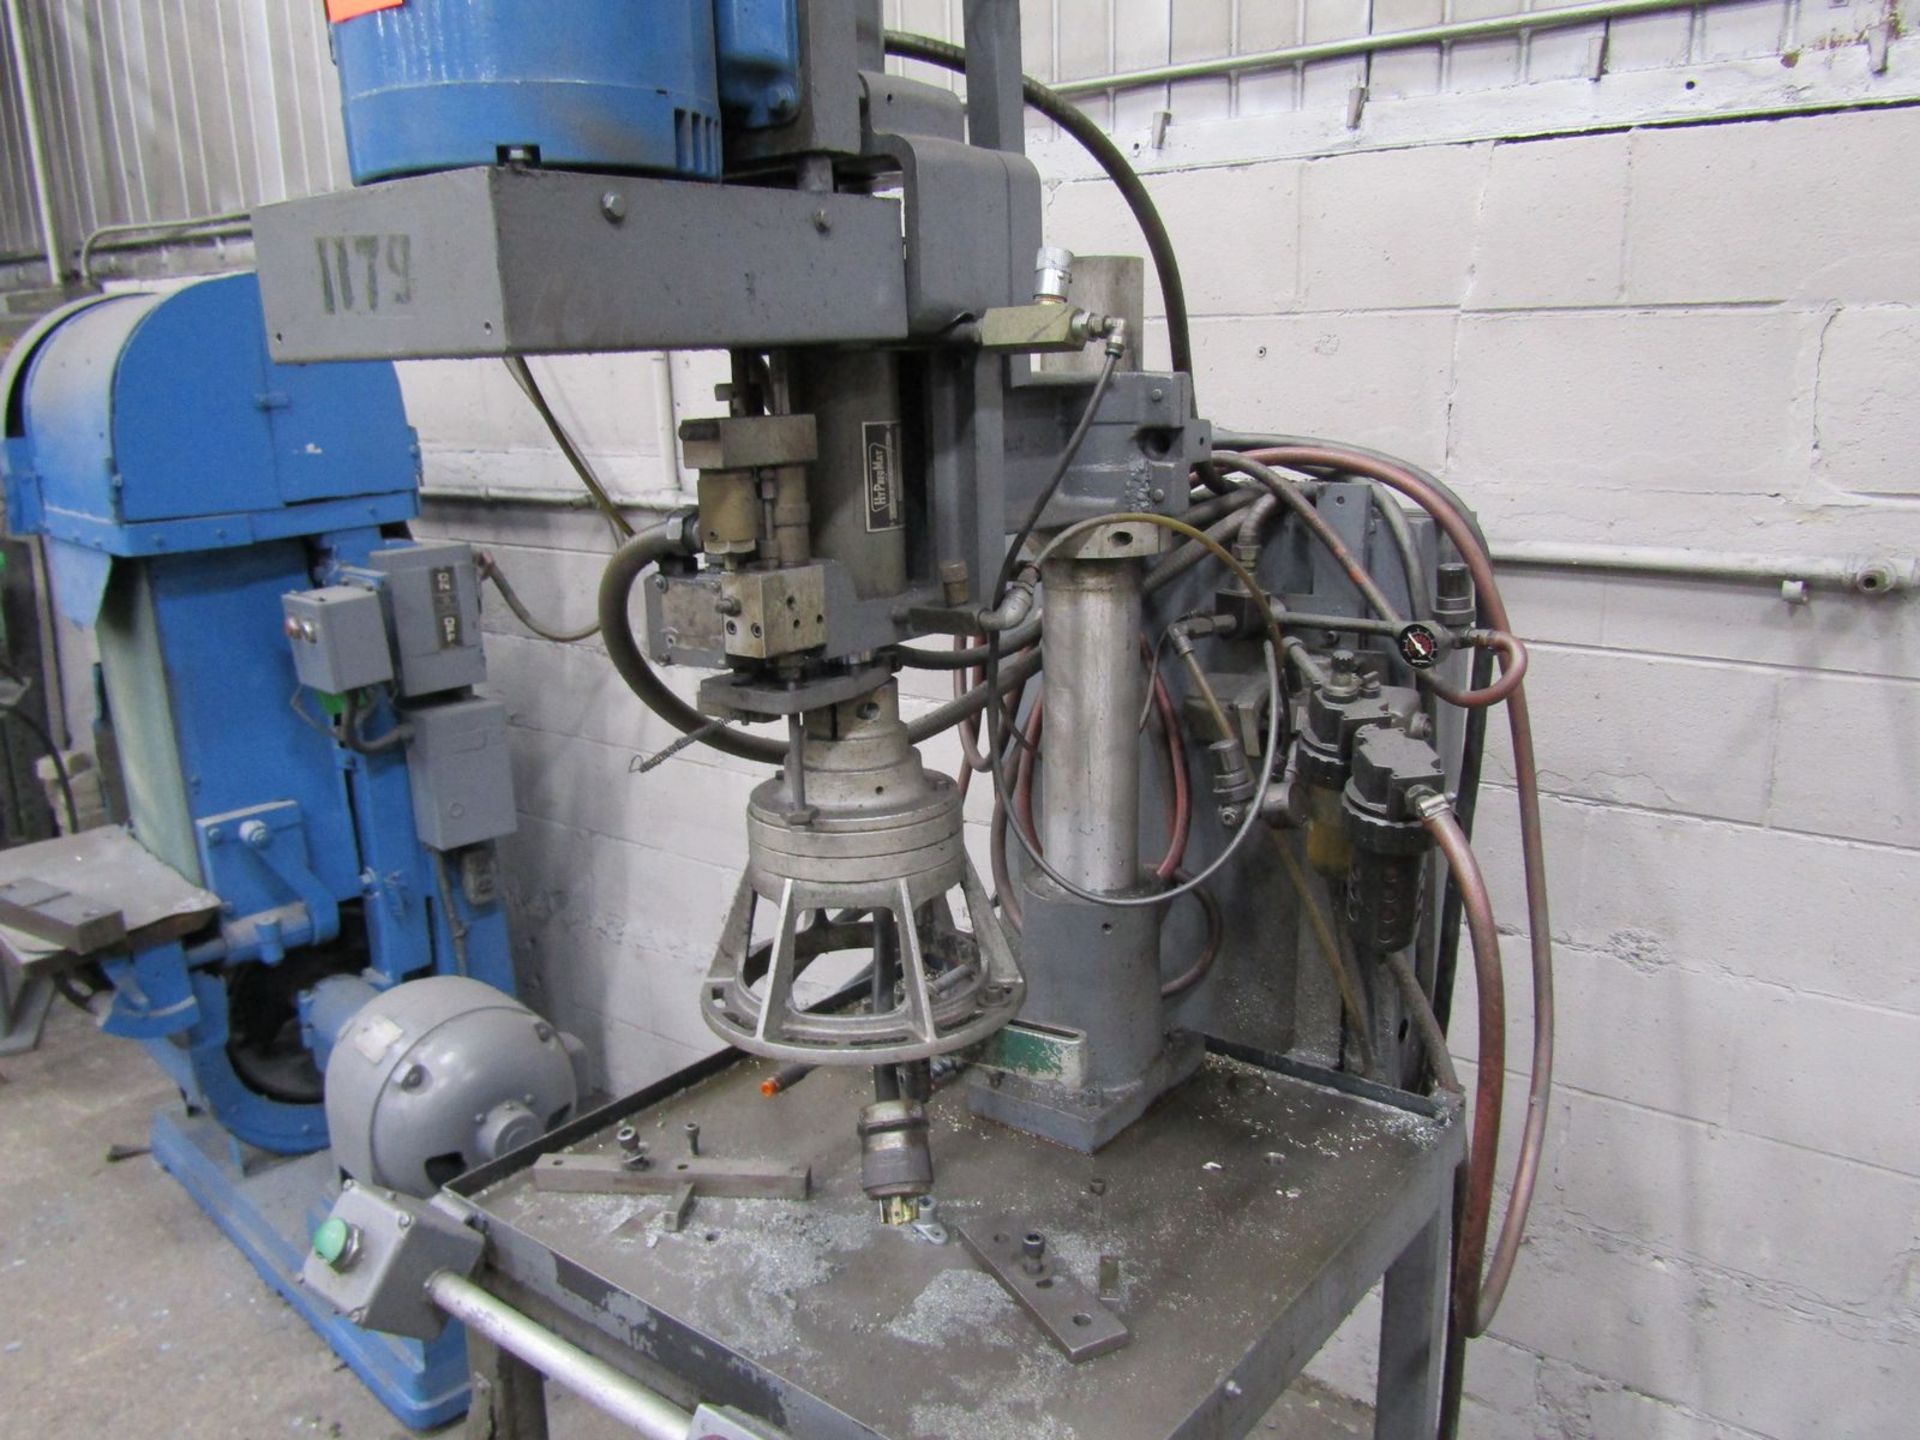 HyPneuMat Model LS-300E6 11090-B Single Head Vertical Drilling & Tapping Machine, S/N: 85202; with - Image 4 of 4